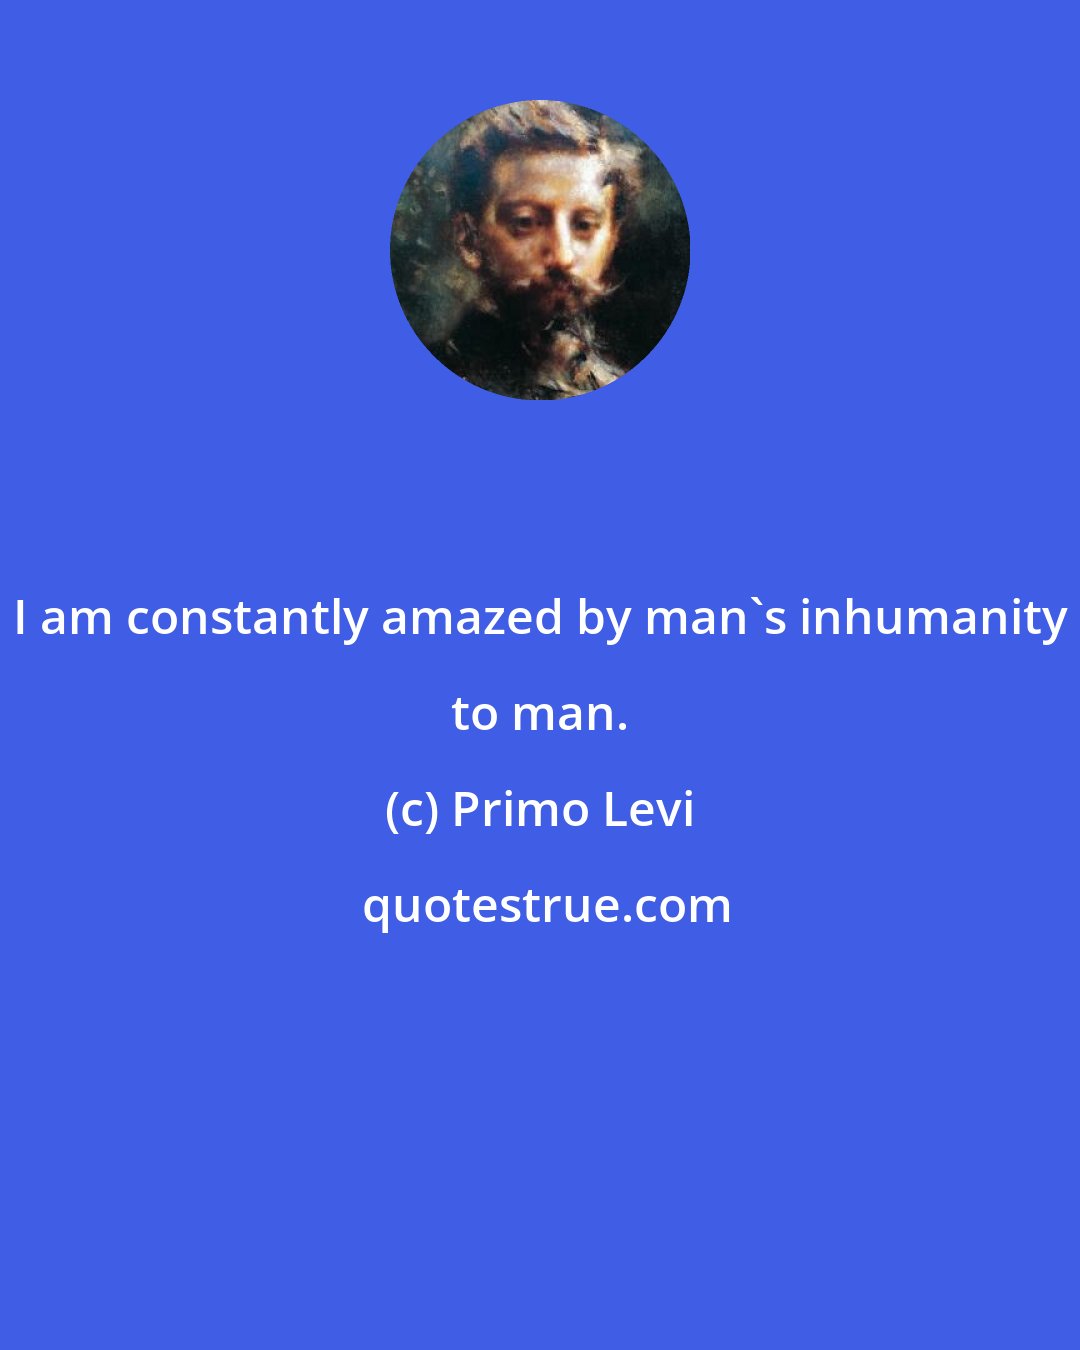 Primo Levi: I am constantly amazed by man's inhumanity to man.